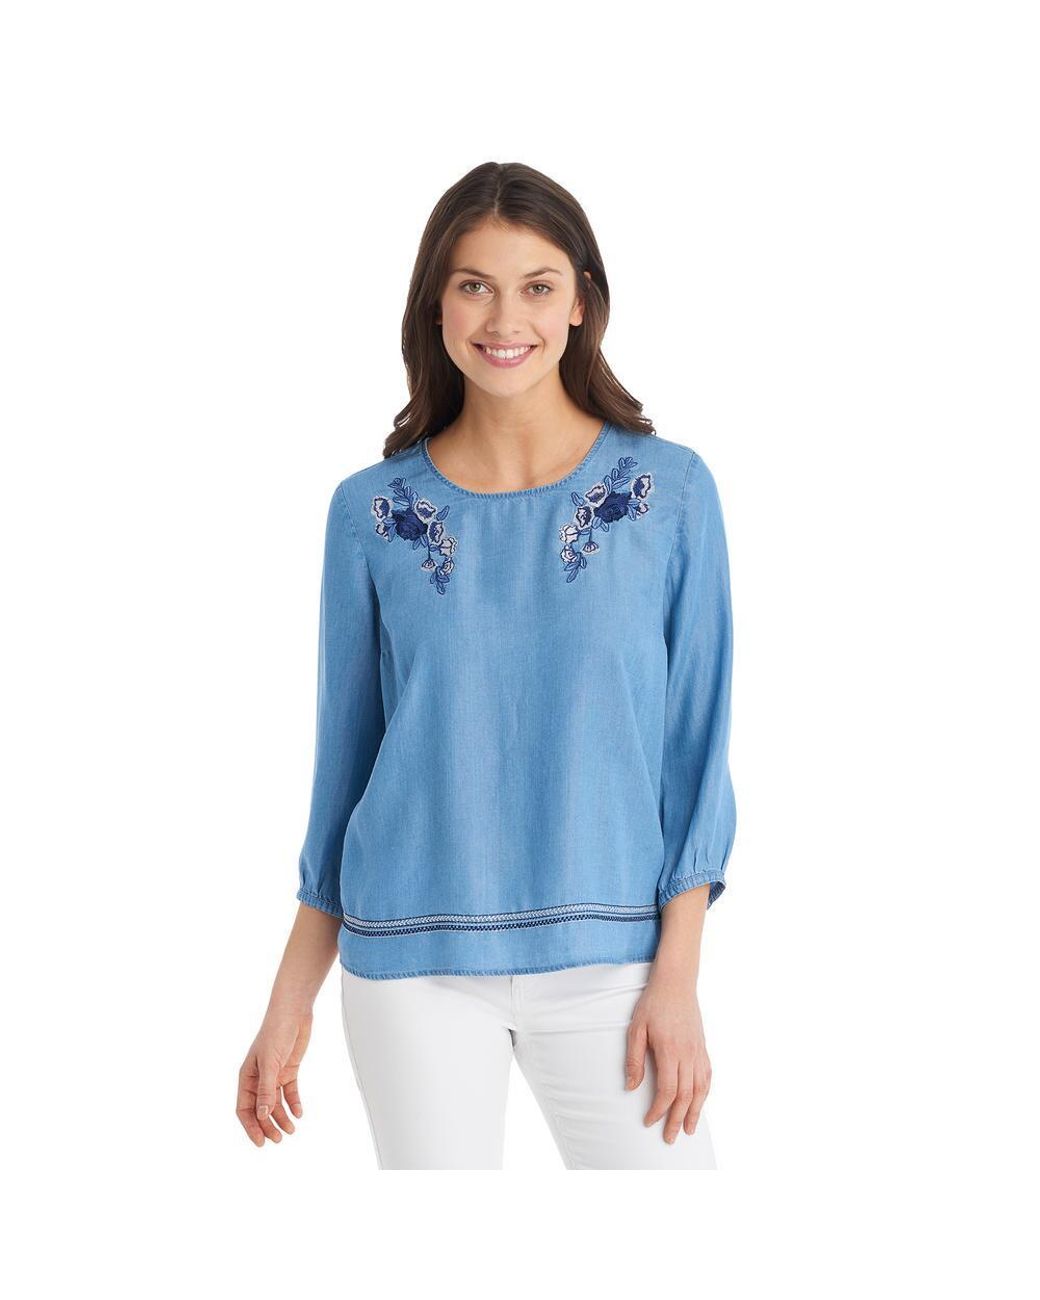 G.H.BASS G.h. Bass Three Quarter Sleeve Embroidered Top Petite in Blue ...